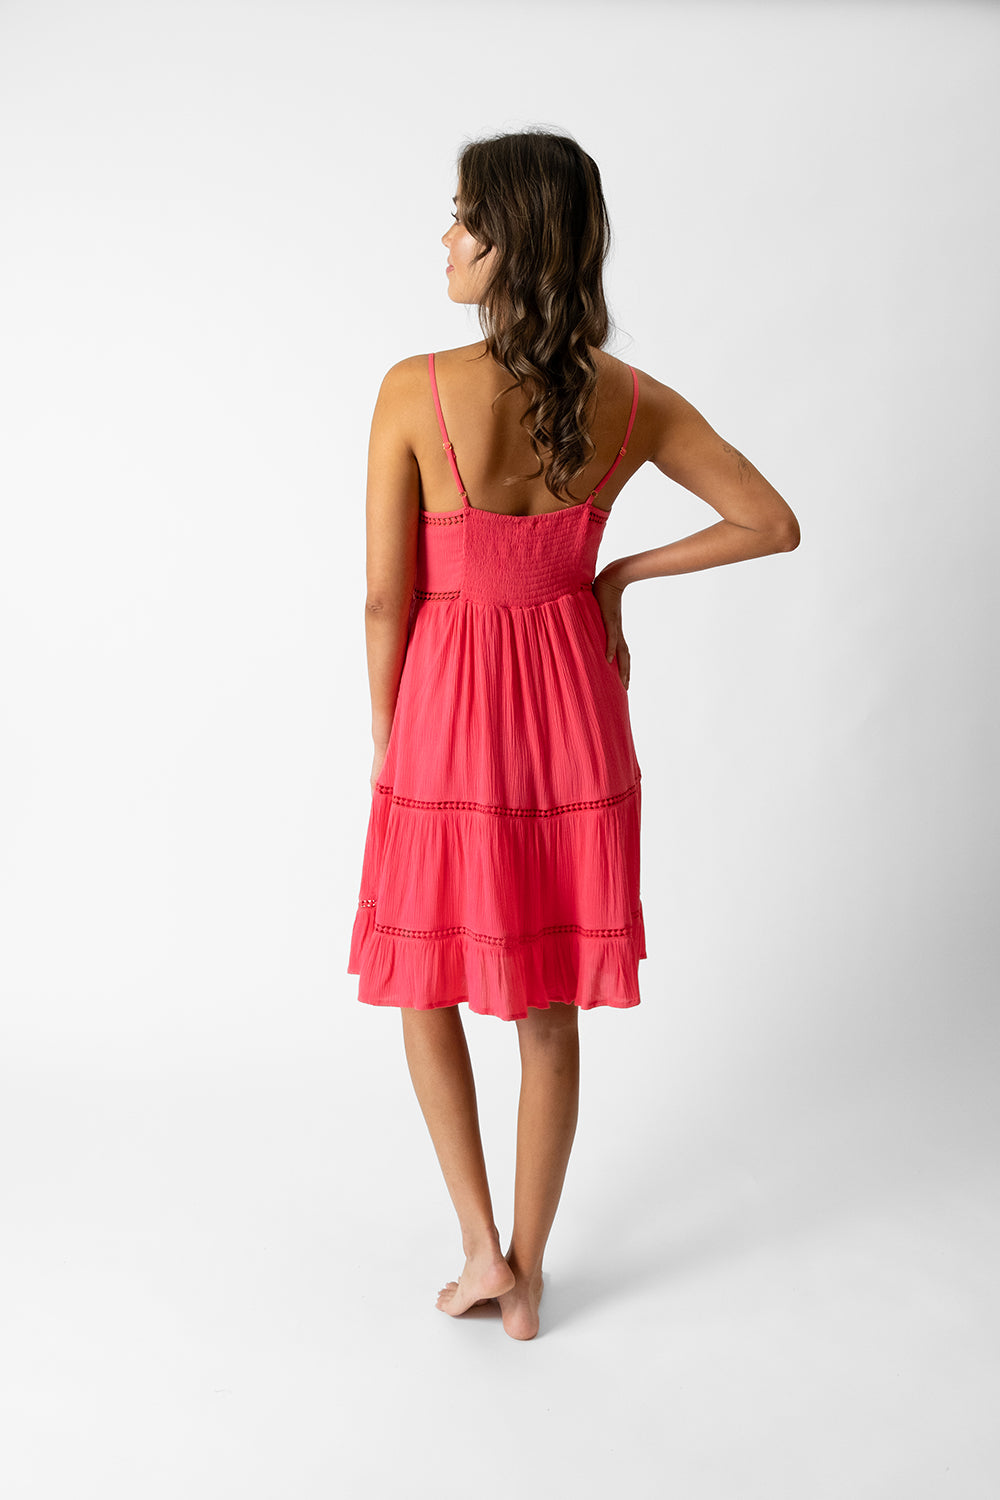 koy resort miami luxe strappy v-neck dress in guava pink for spring 2024 womens fashion collection